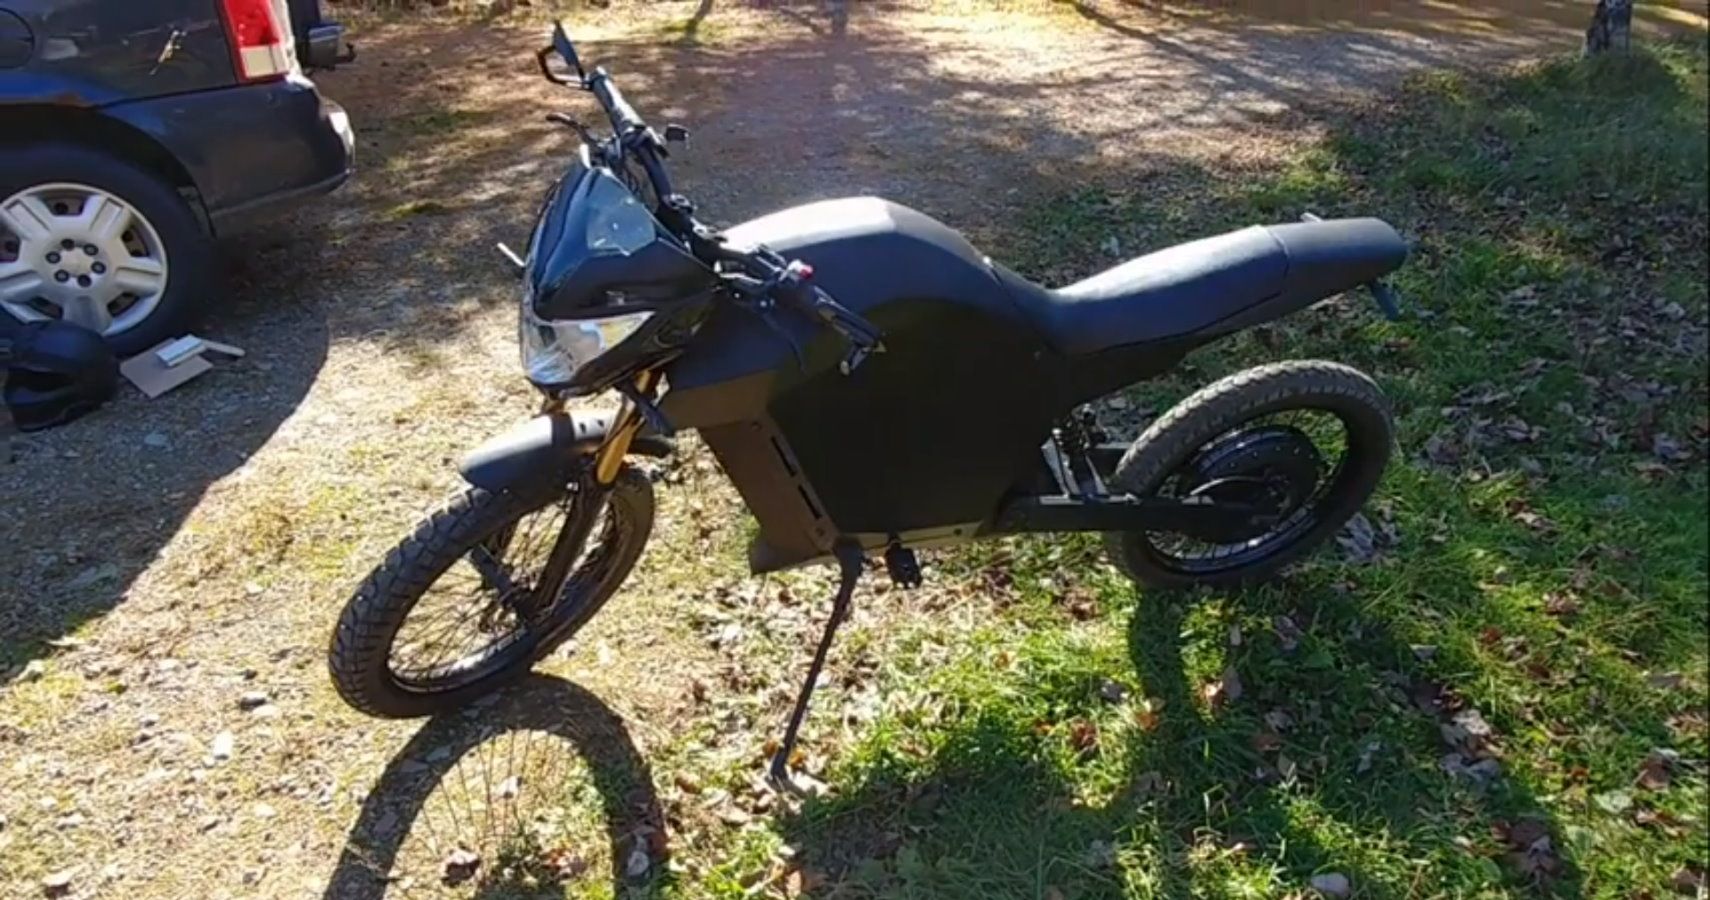 Who Needs A Harley? Man Builds Electric Motorcycle In His Garage